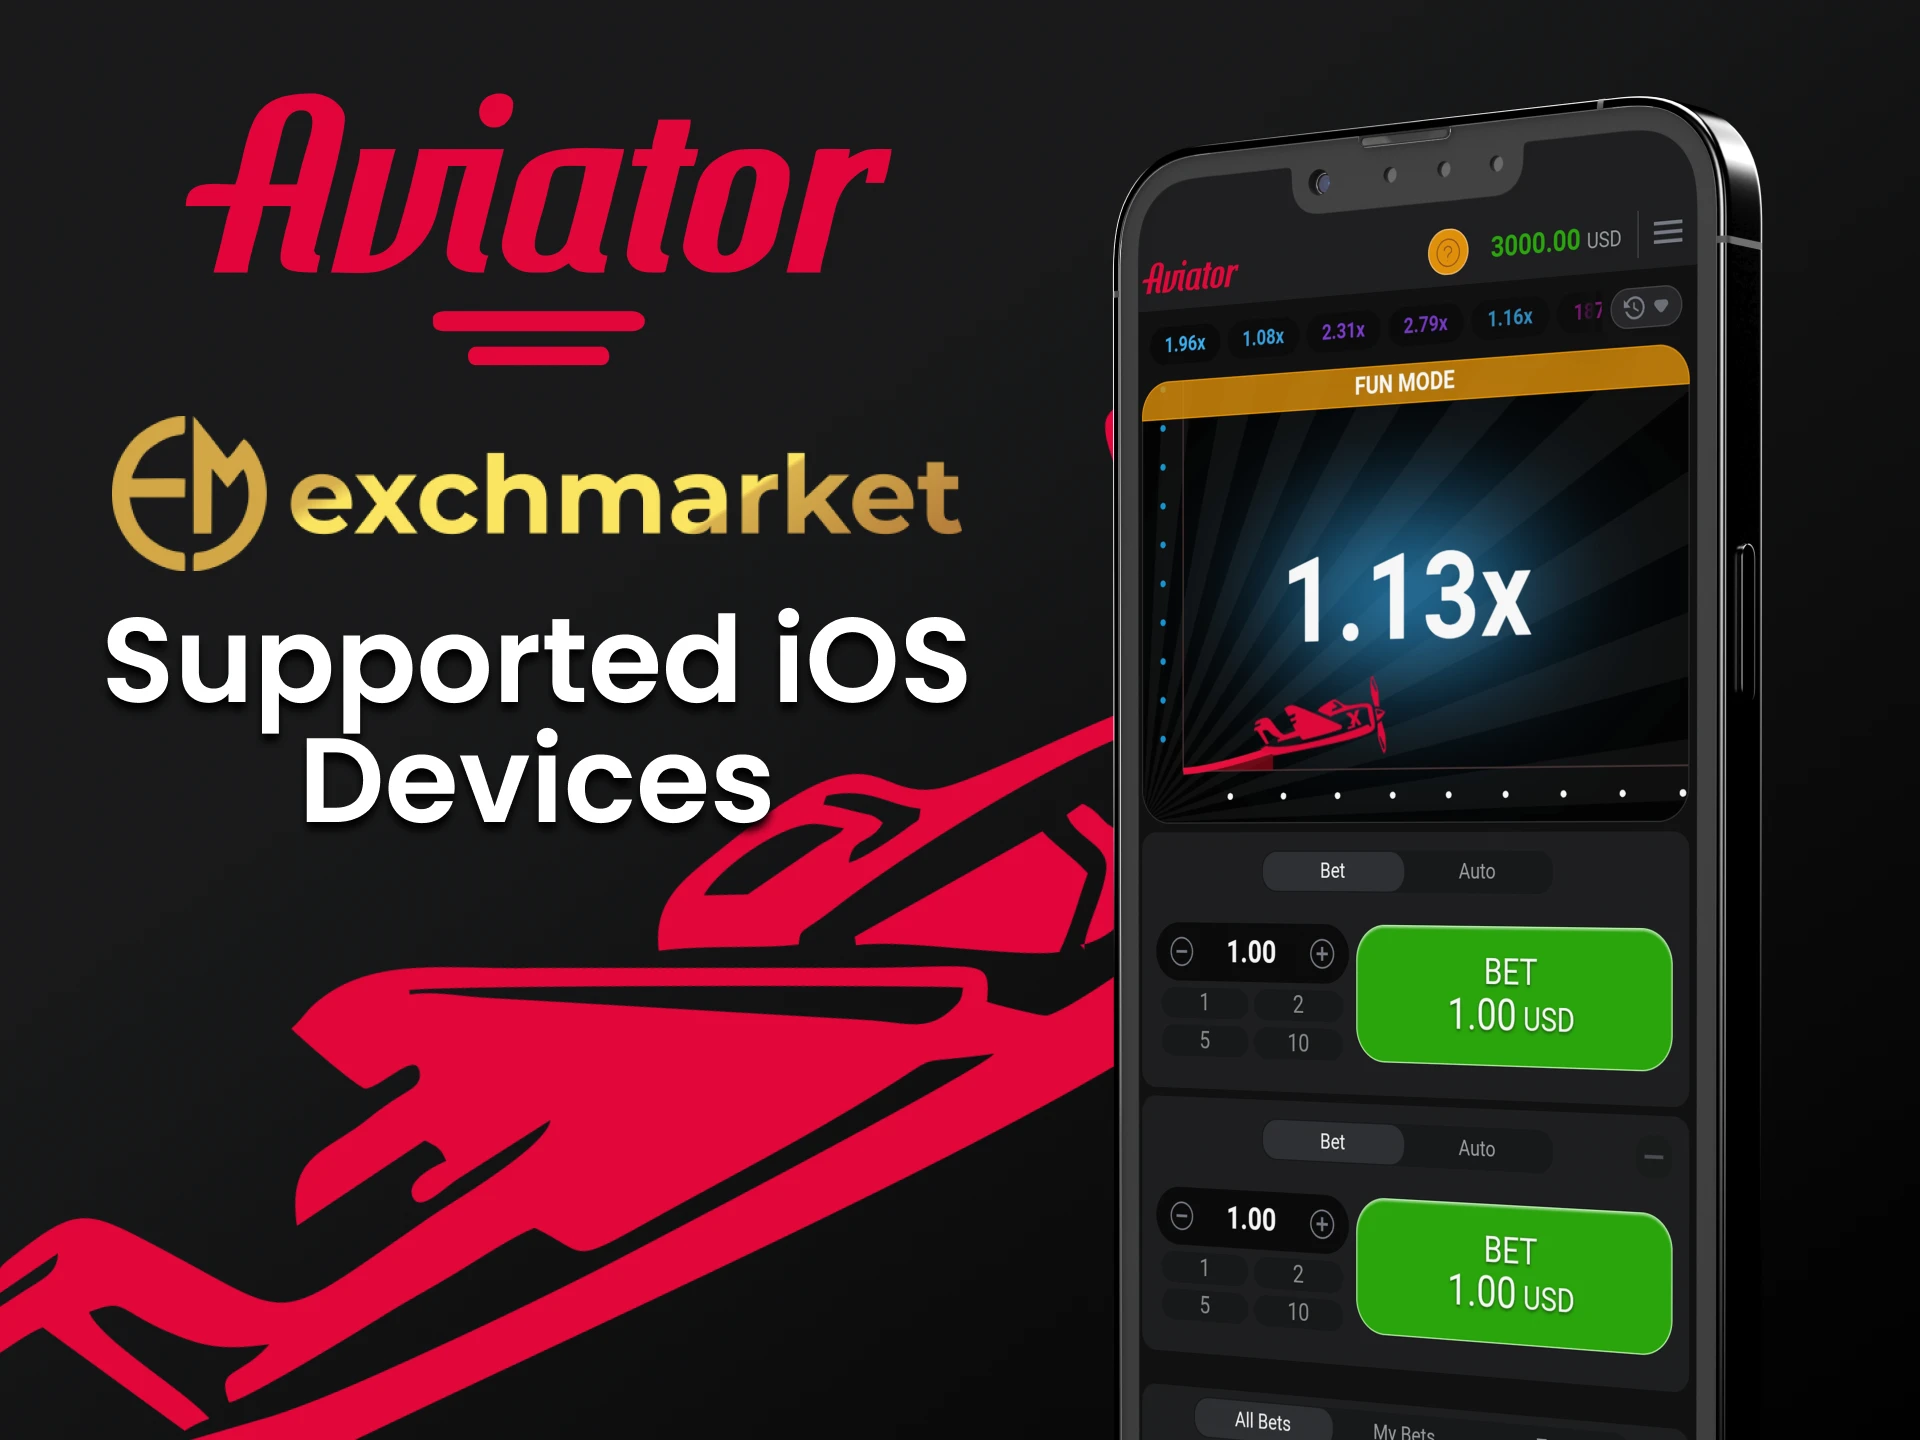 Play Aviator through your iOS device on Exchmarket.